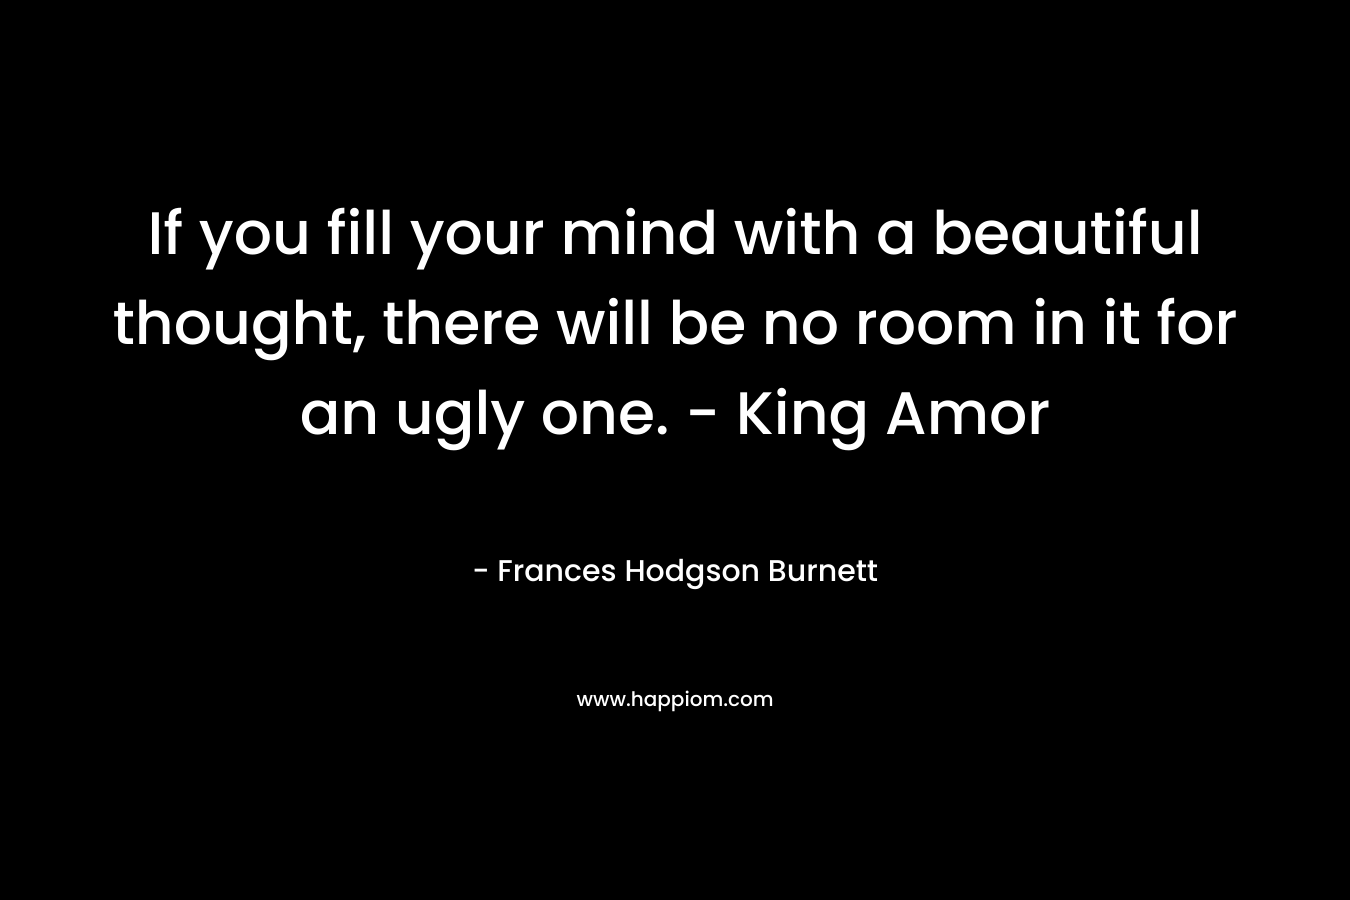 If you fill your mind with a beautiful thought, there will be no room in it for an ugly one. - King Amor